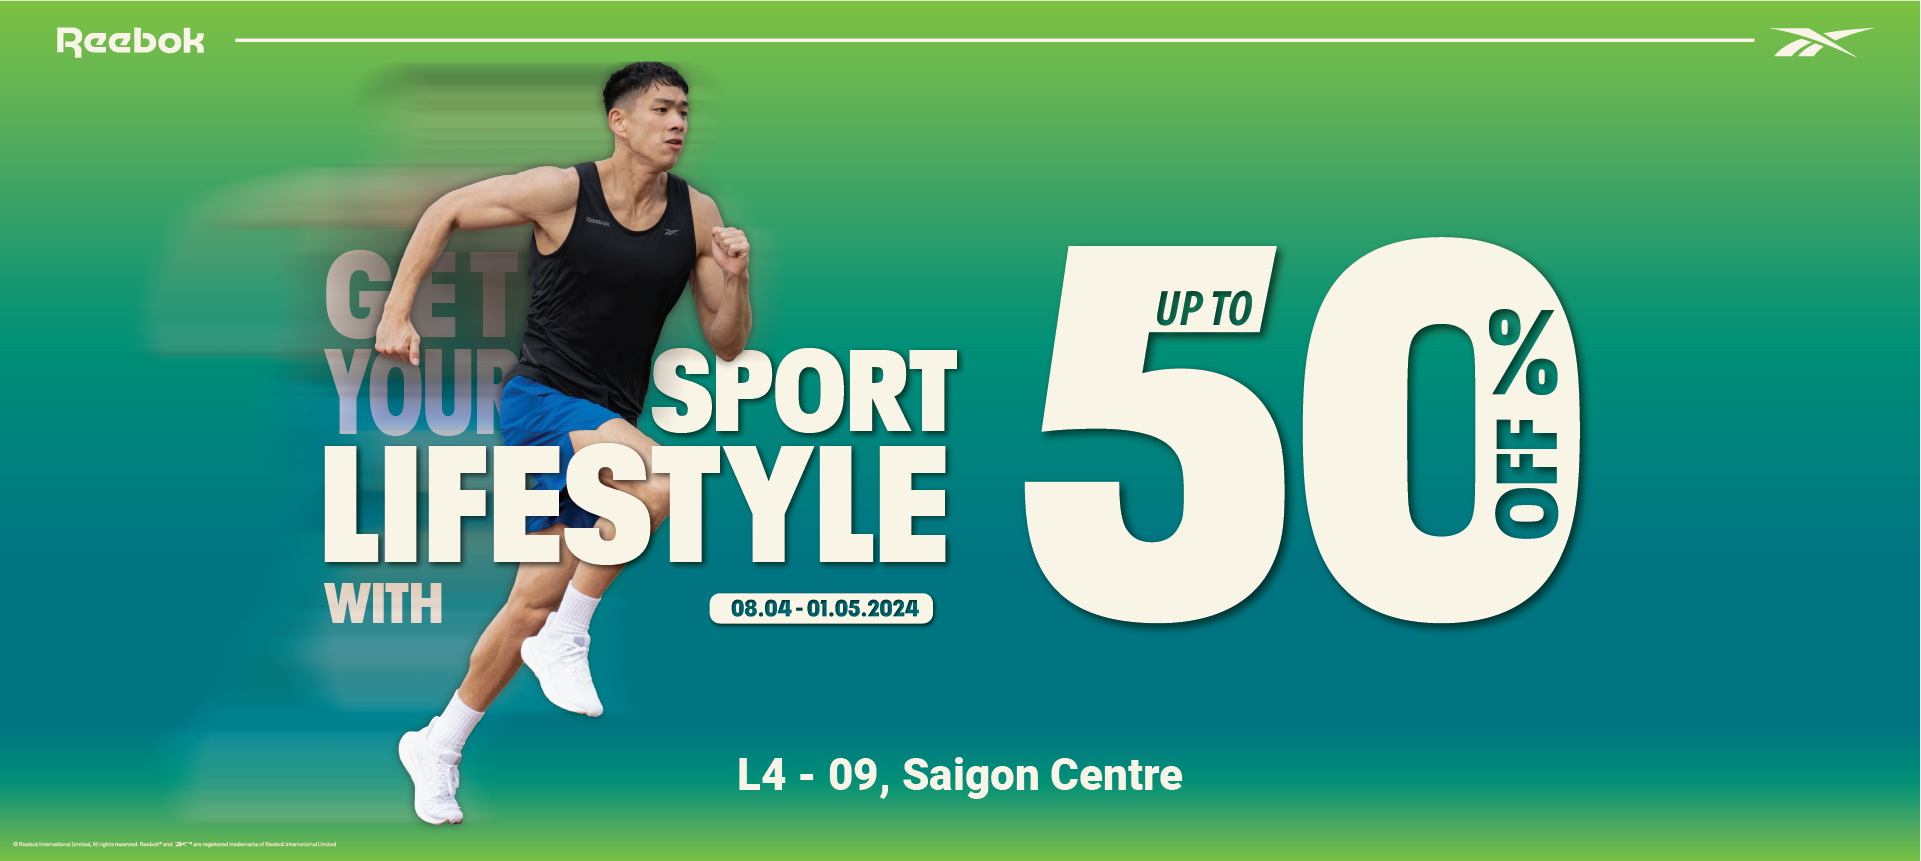 REEBOK - GET YOUR SPORT LIFESTYLE WITH UP TO 50% OFF